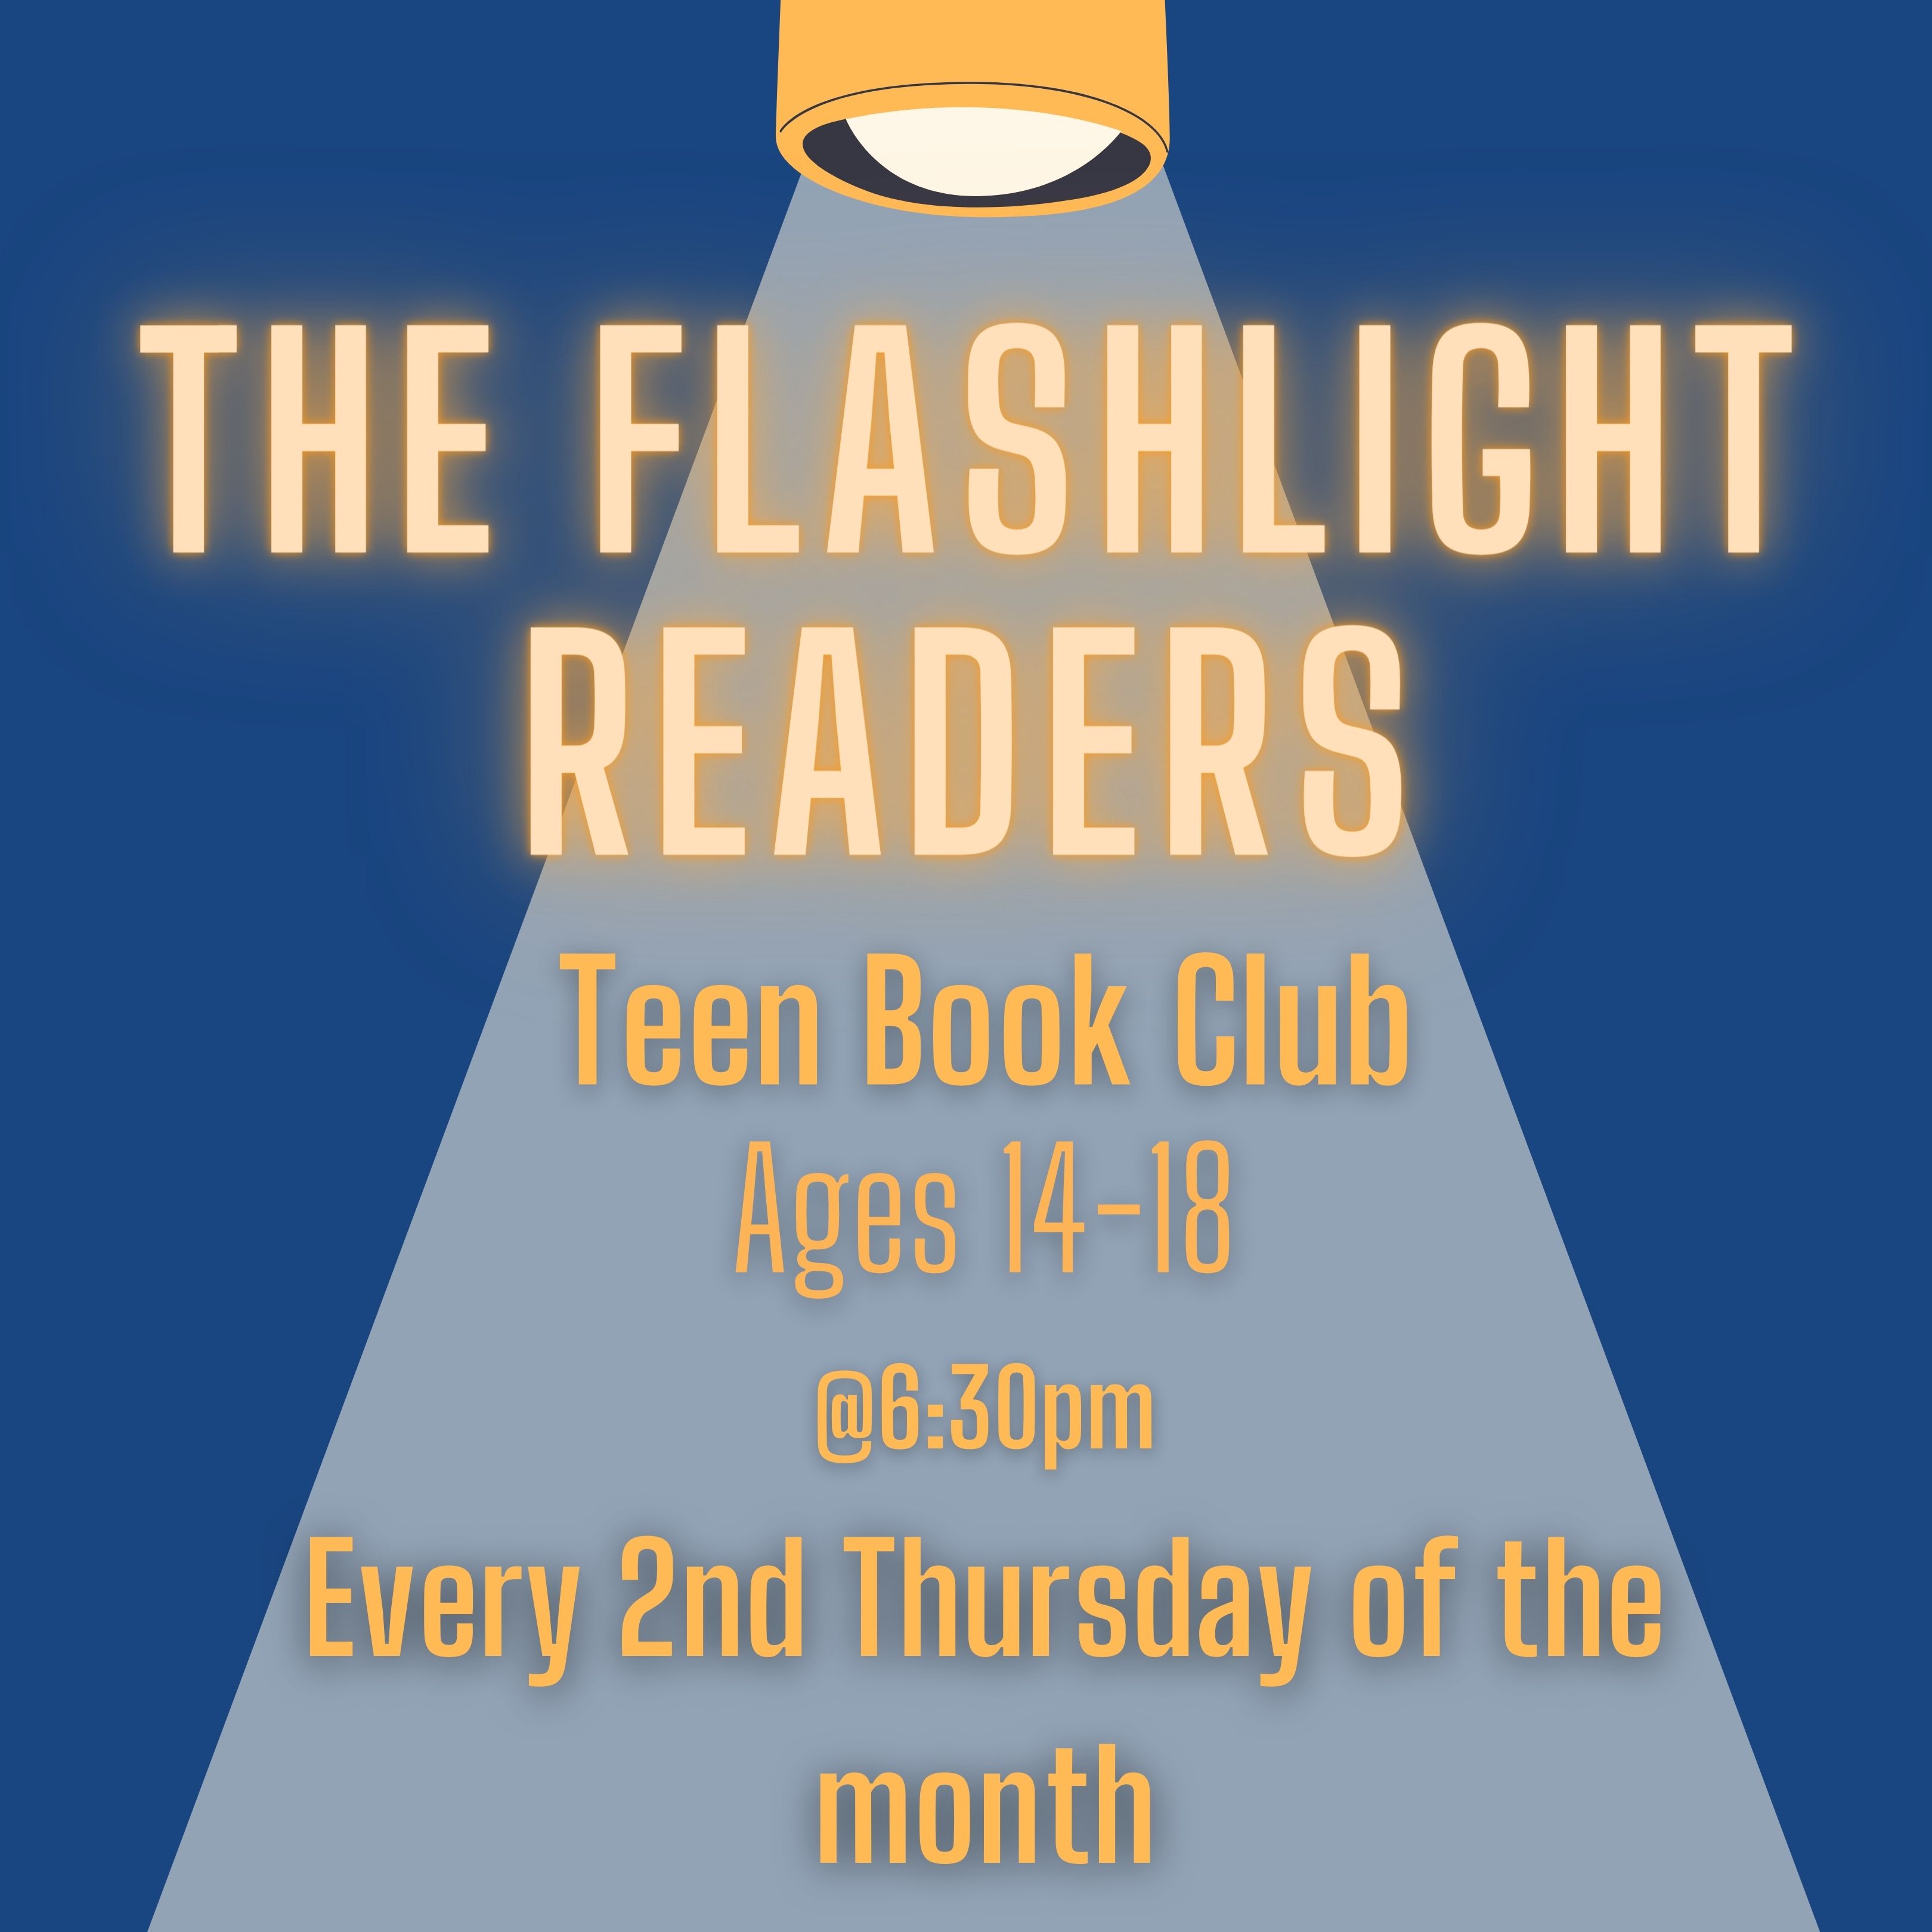 Image of a flashlight beam illuminating the text on the picture: The Flashlight Readers Teen Book Club, ages 14-18 @6:30pm. Every 2nd Thursday of the month.Image of a flashlight beam illuminating the text on the picture: The Flashlight Readers Teen Book Club, ages 14-18 @6:30pm. Every 2nd Thursday of the month.